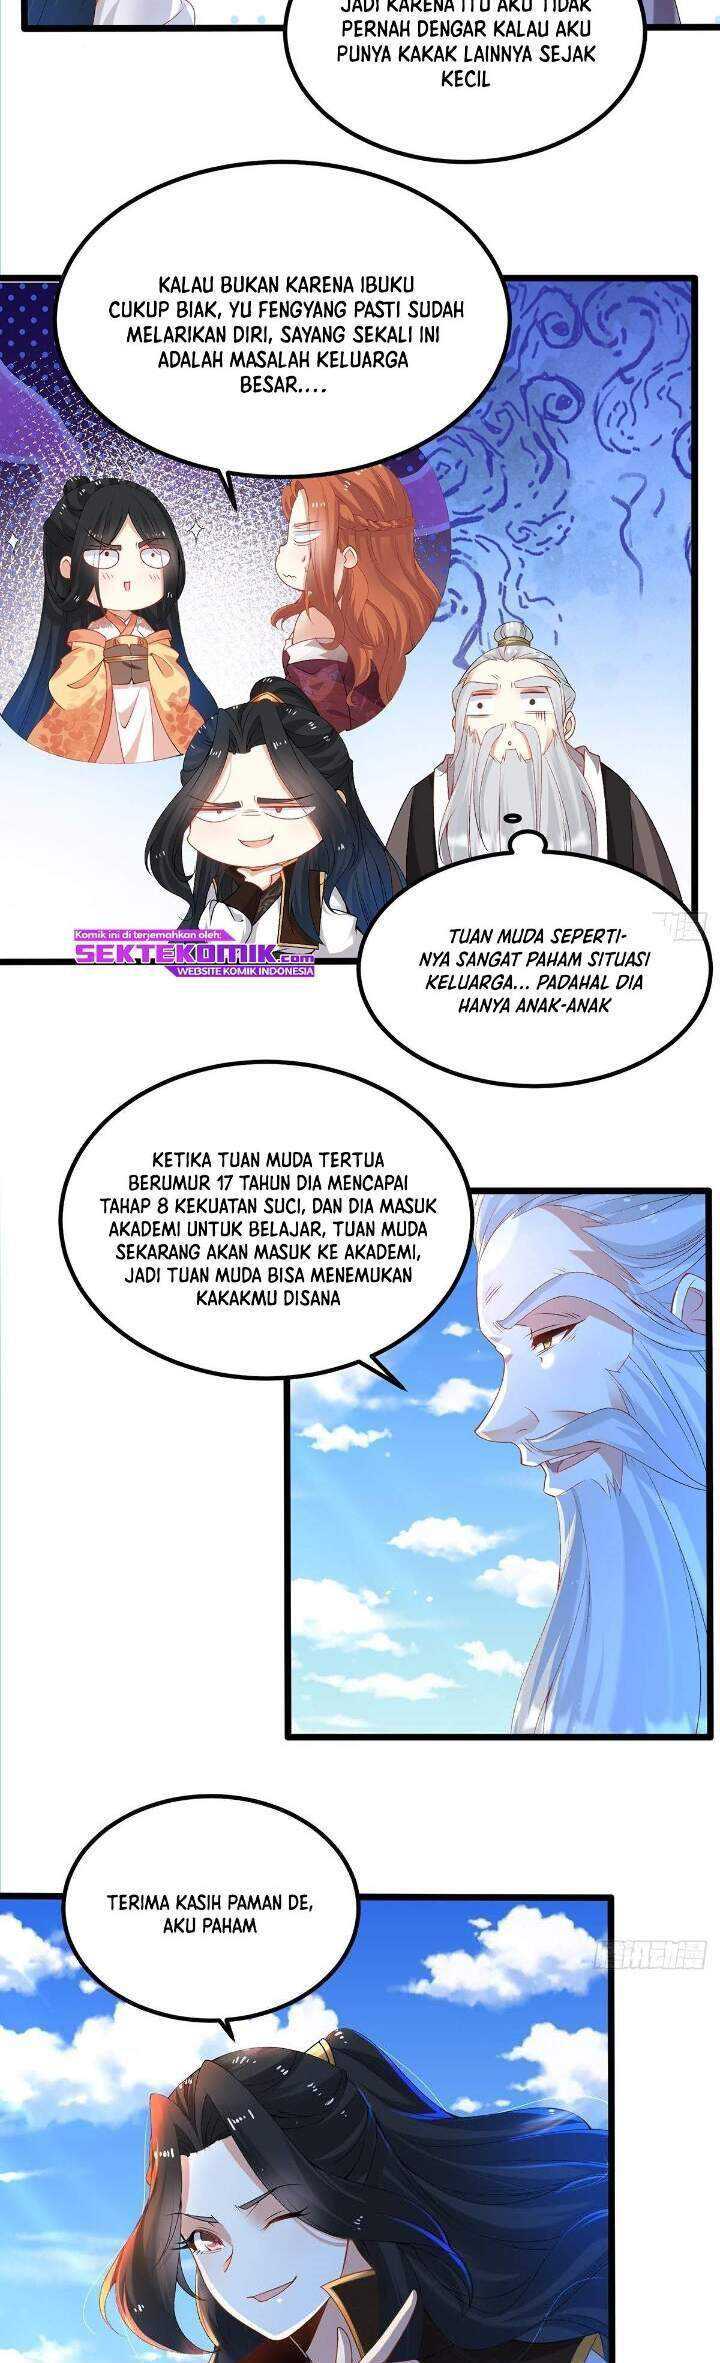 Chaotic Sword God (Remake) Chapter 09